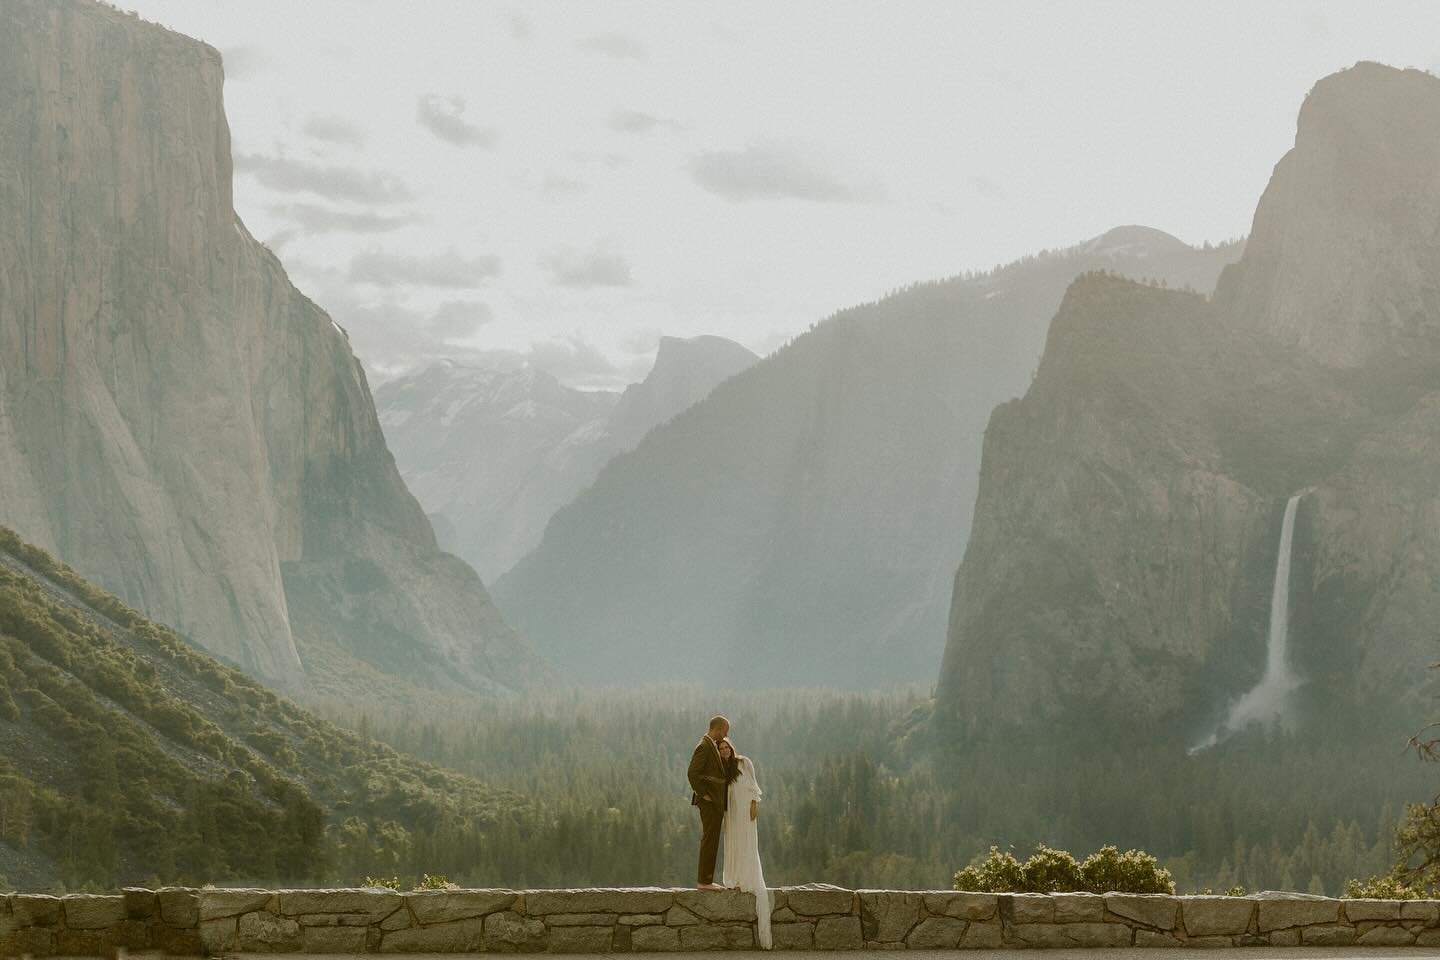 Bri and Stevee, under El Cap at dawn. A weekend spent outside of Yosemite- dusty toes turned to muddy, sunshine turned to showers. These moments early on their wedding day, breathing the air of the Sierra Nevadas and being still with one another will